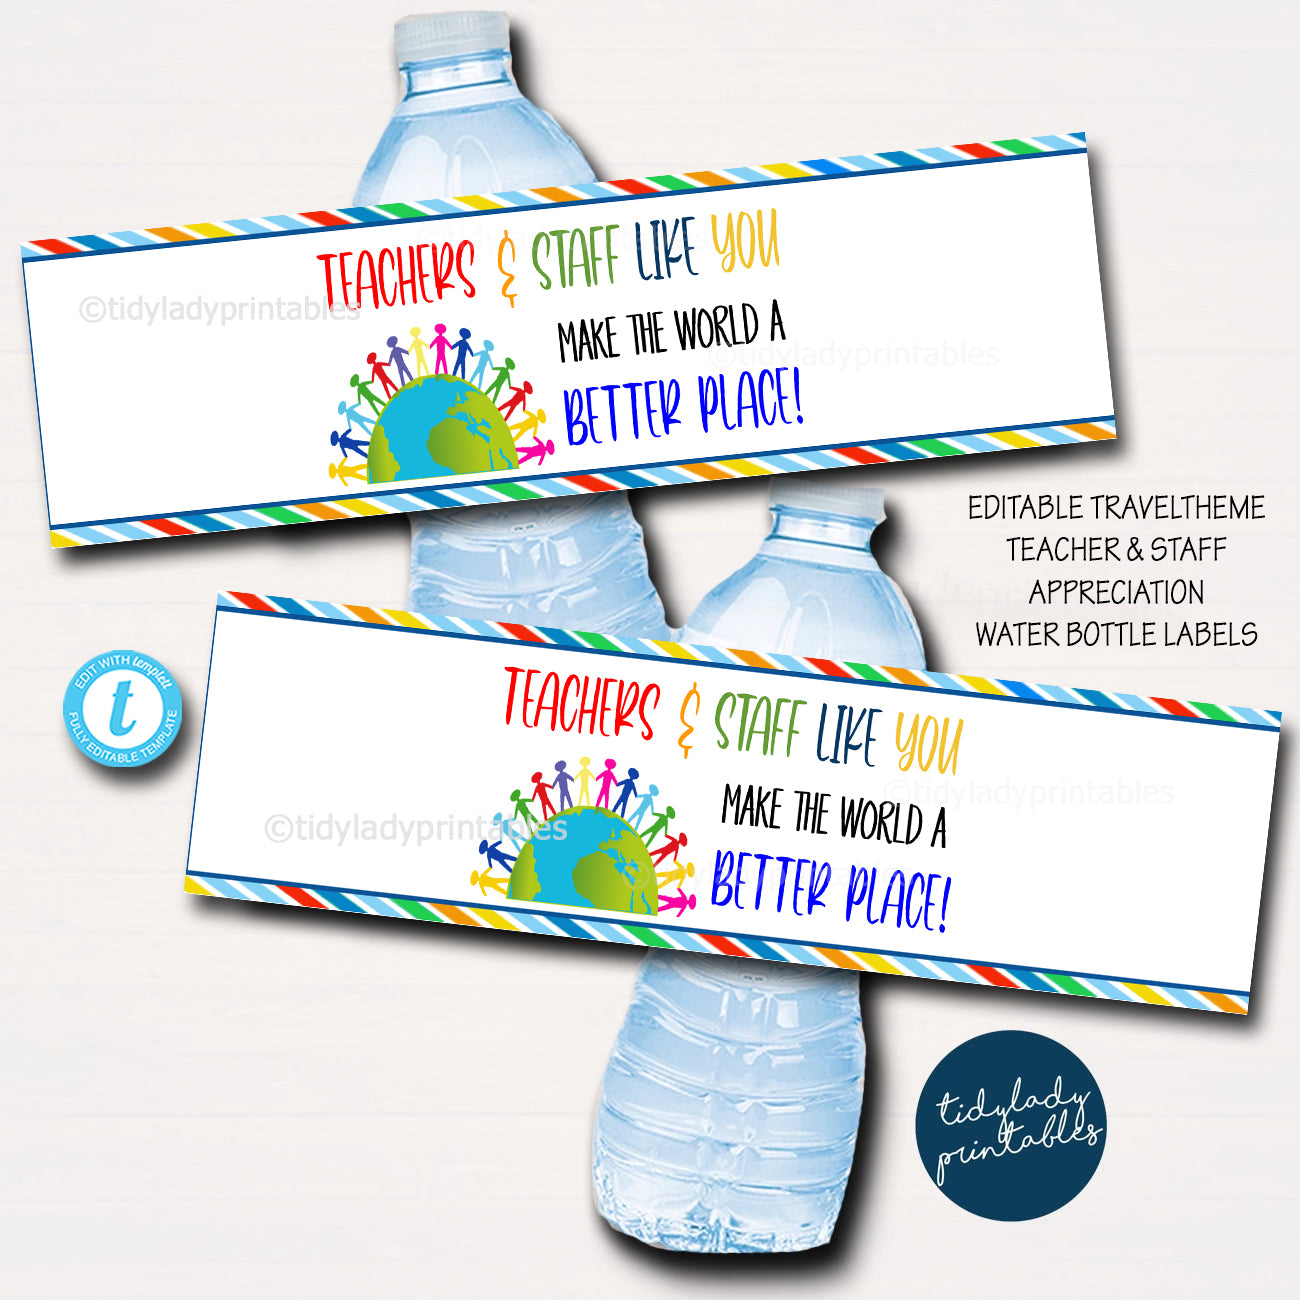 Soccer Water Bottle Labels. Sports Party Labels. Printable 